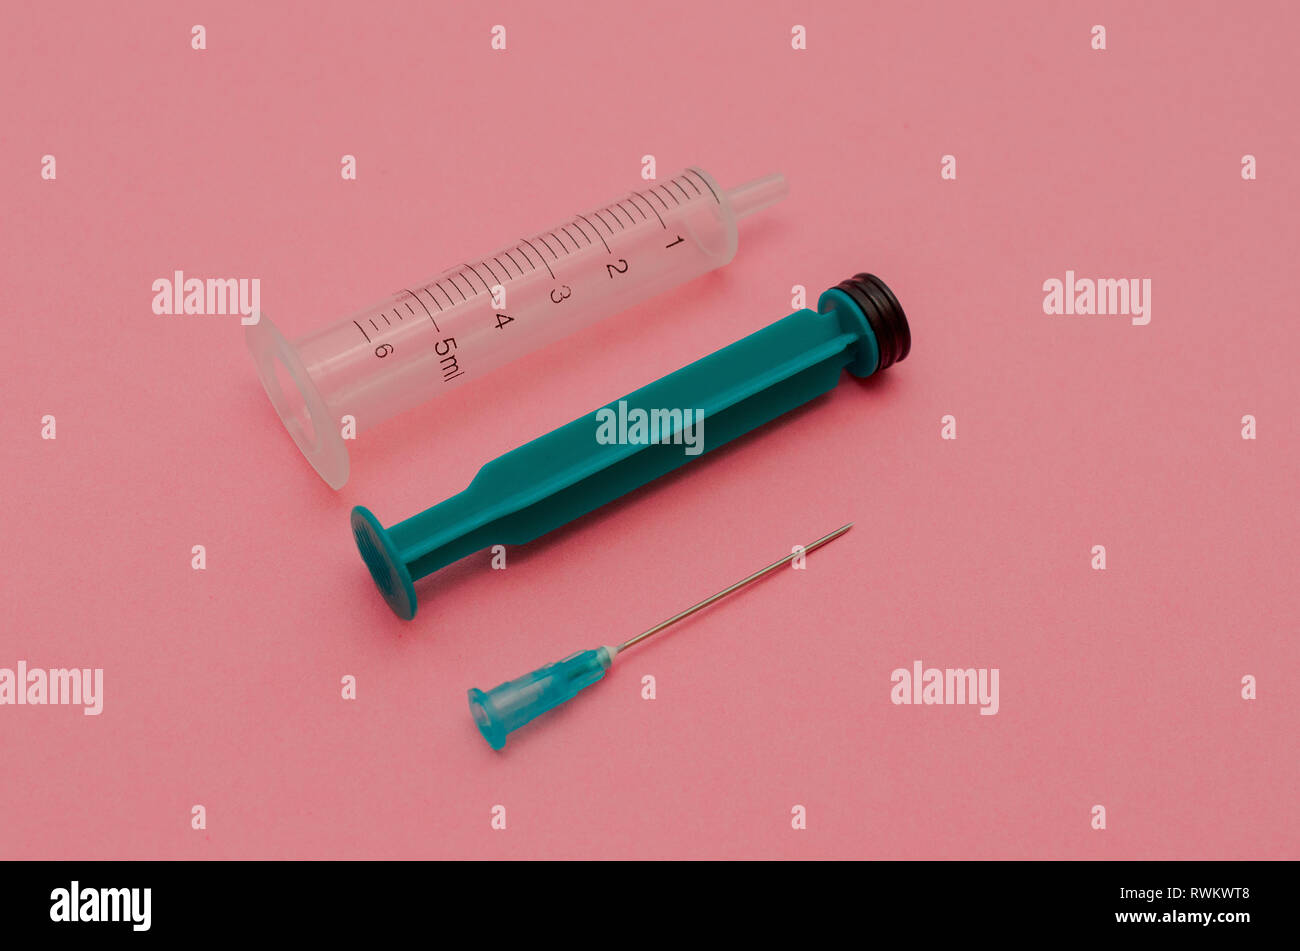 Syringe with green piston on a pink background. The concept of health Stock Photo